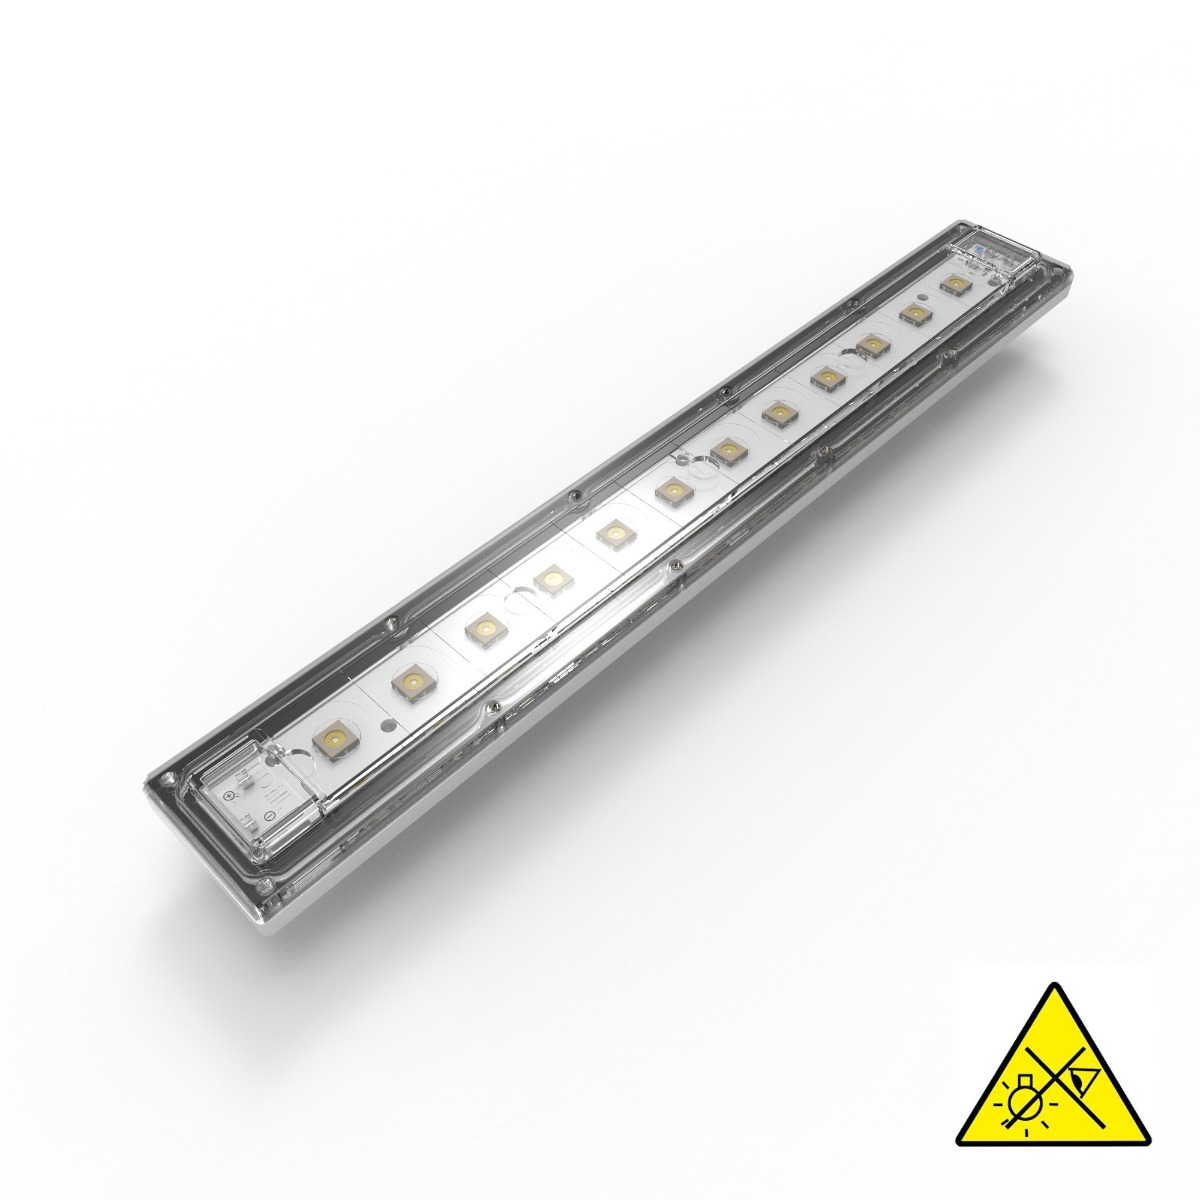 Violet UVC Seoul Viosys LED Module 275nm 12 LEDs 192mW 11.41" 600mA IP67 for disinfection